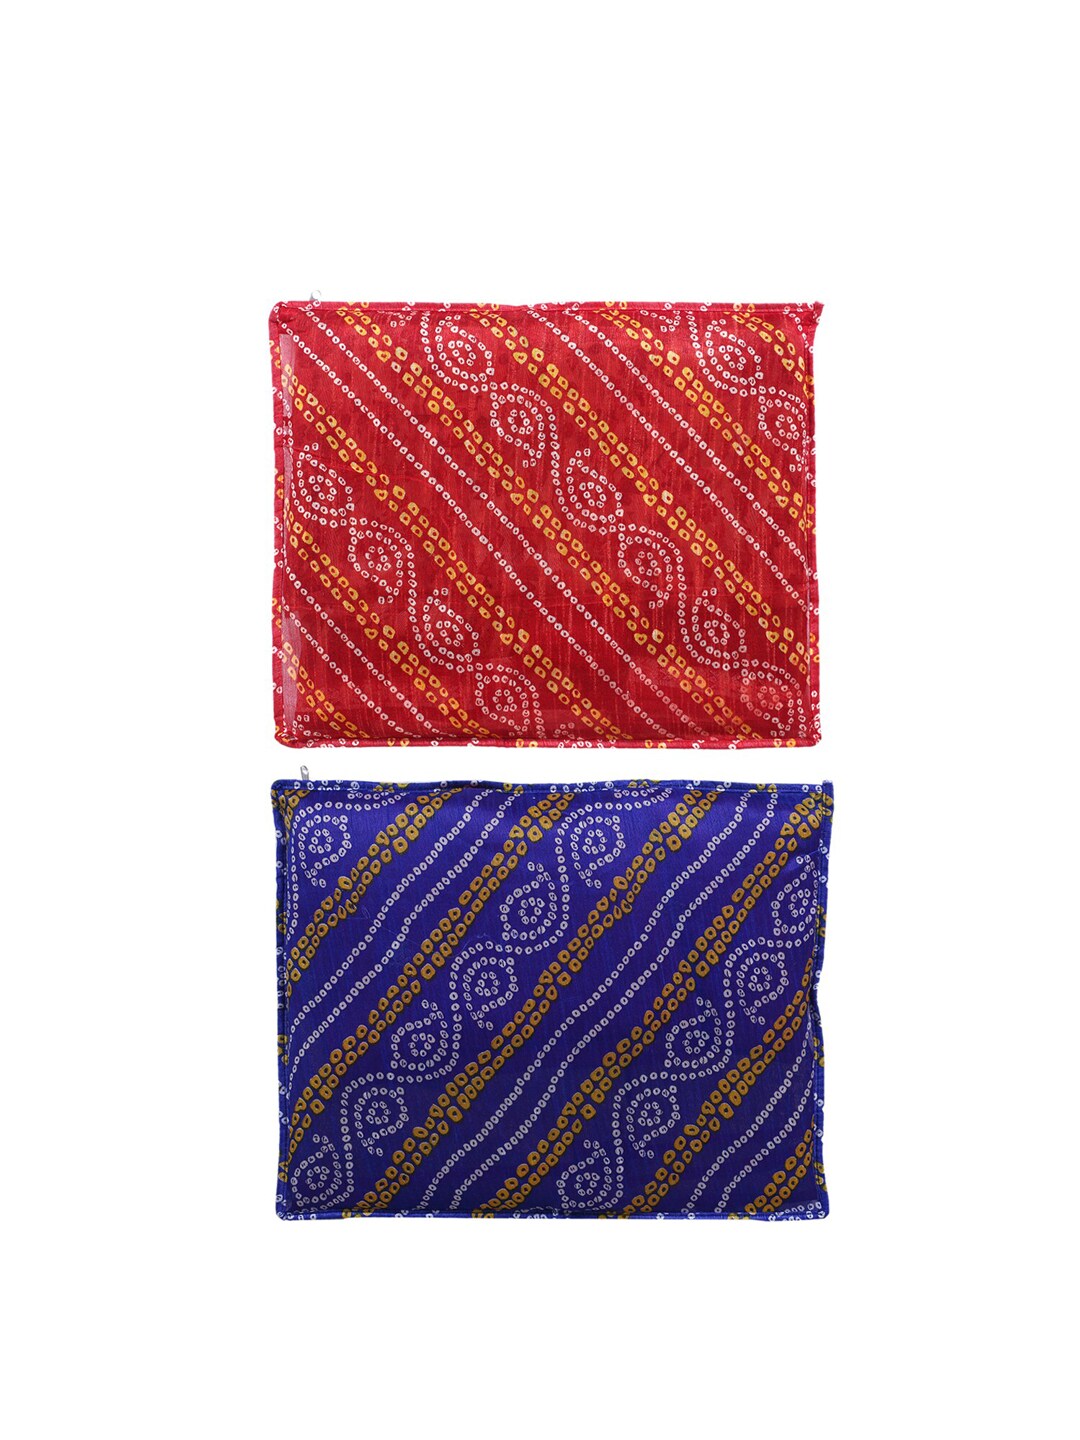 Kuber Industries Set Of 6 Printed PVC Foldable Single Saree Cover Organisers Price in India